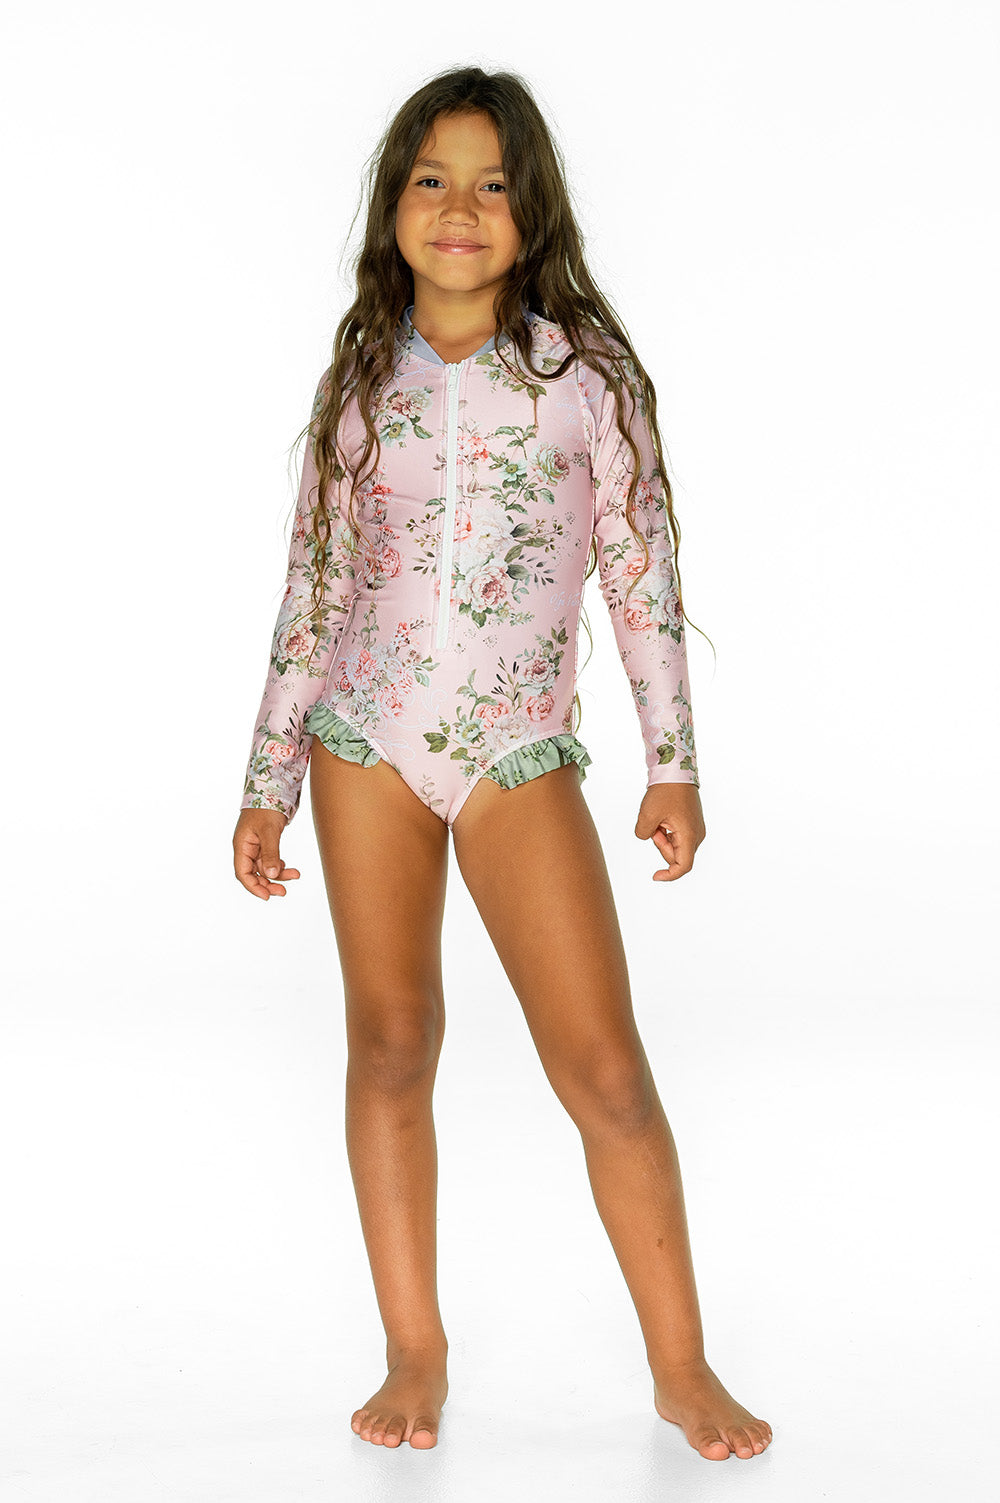 Girls Long Sleeve Swimsuit - Pink Floral - Adore - Front